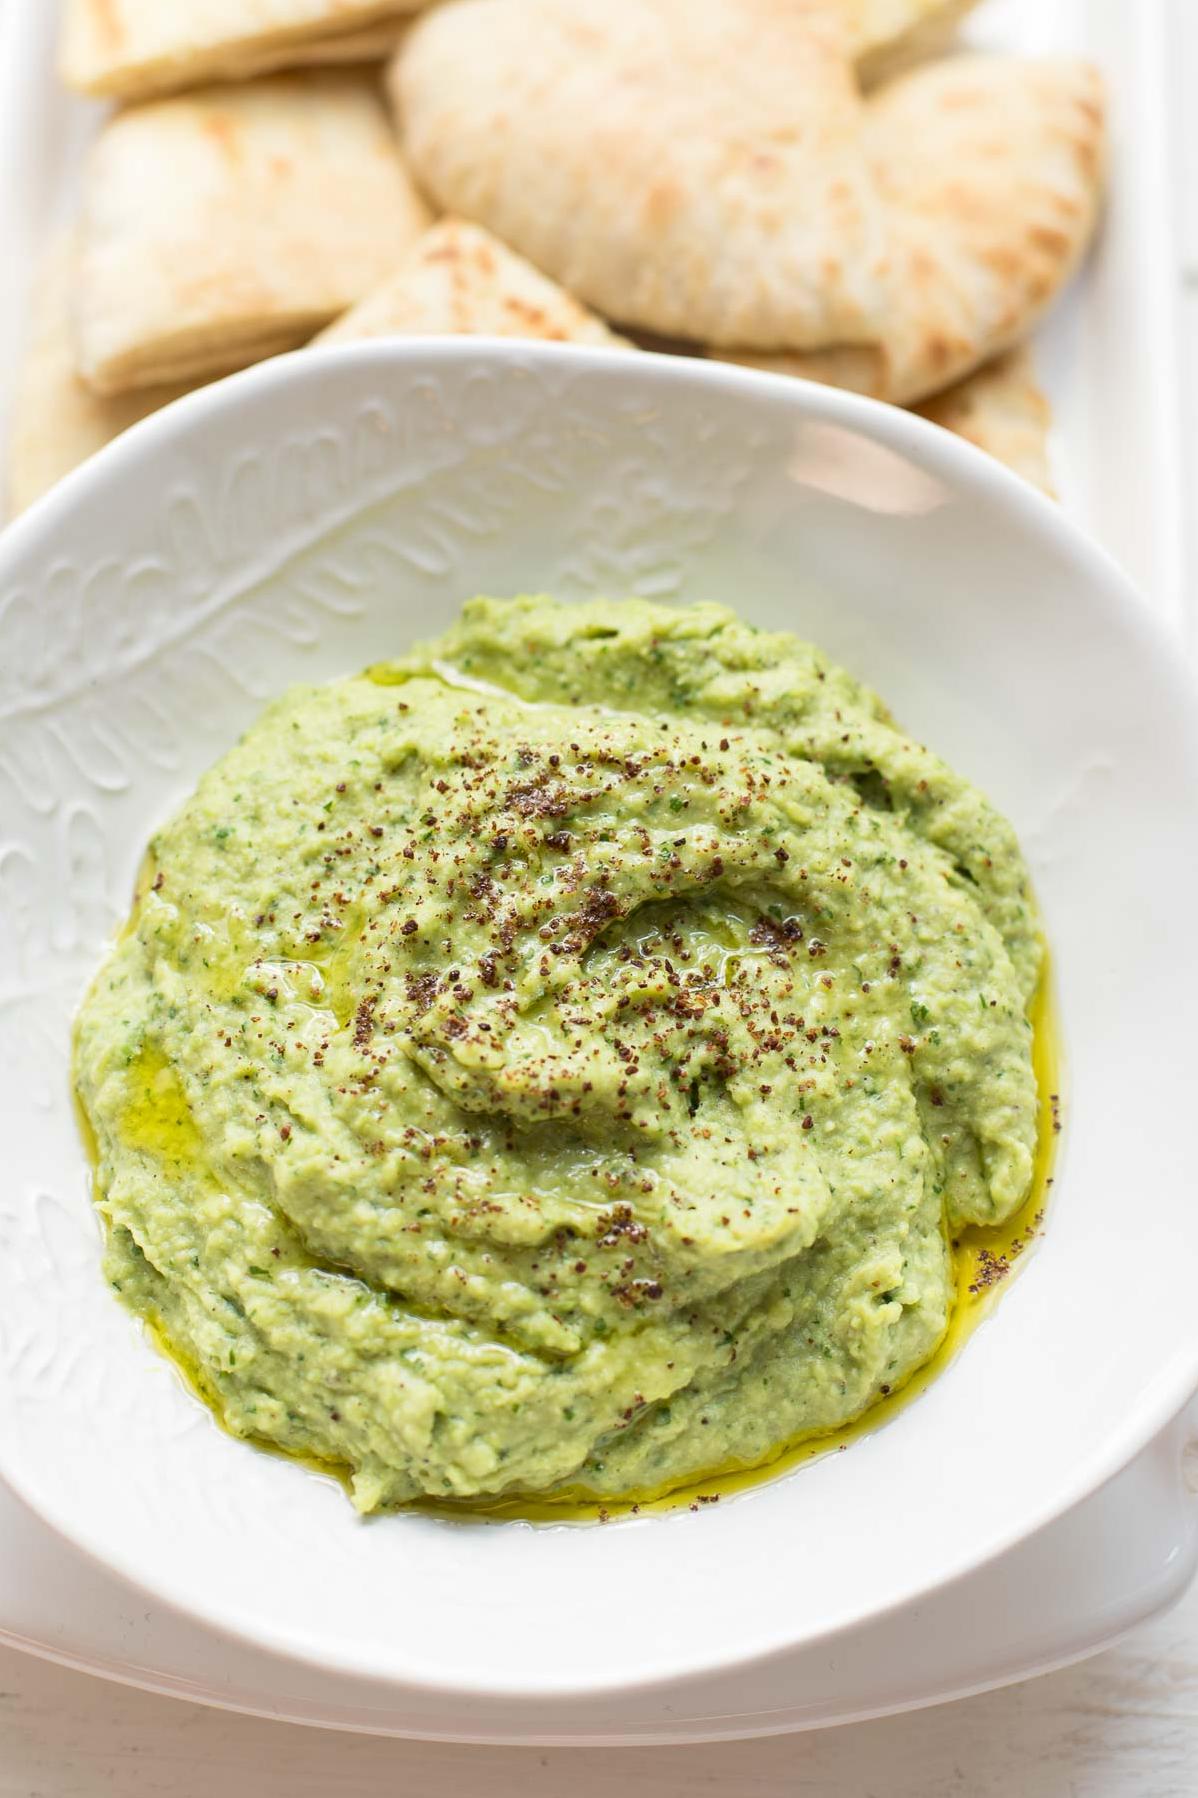  Fava beans are the secret ingredient in this creamy and flavorful hummus.